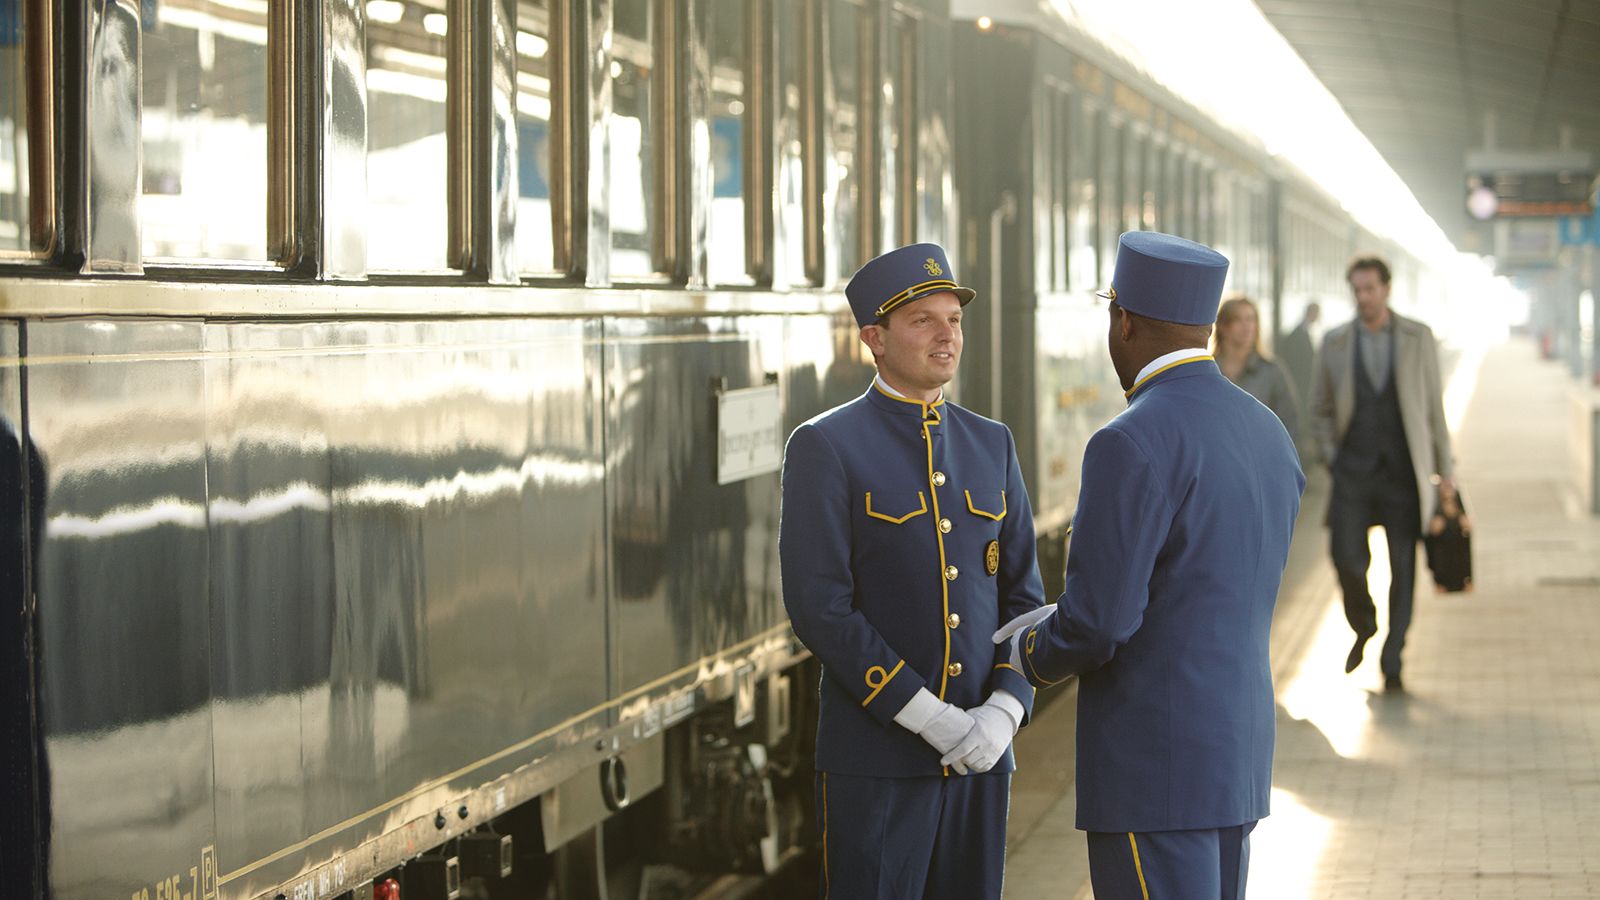 MNSWR Magazine - Sunday dreaming about travel Would you catch this  Belmond train, the Venice Simplon-orient-express? See you later guys!  #mnswr #mnswrmagazine #lifestyle #class #timeless #style #details #belmond  #venice #orientexpress